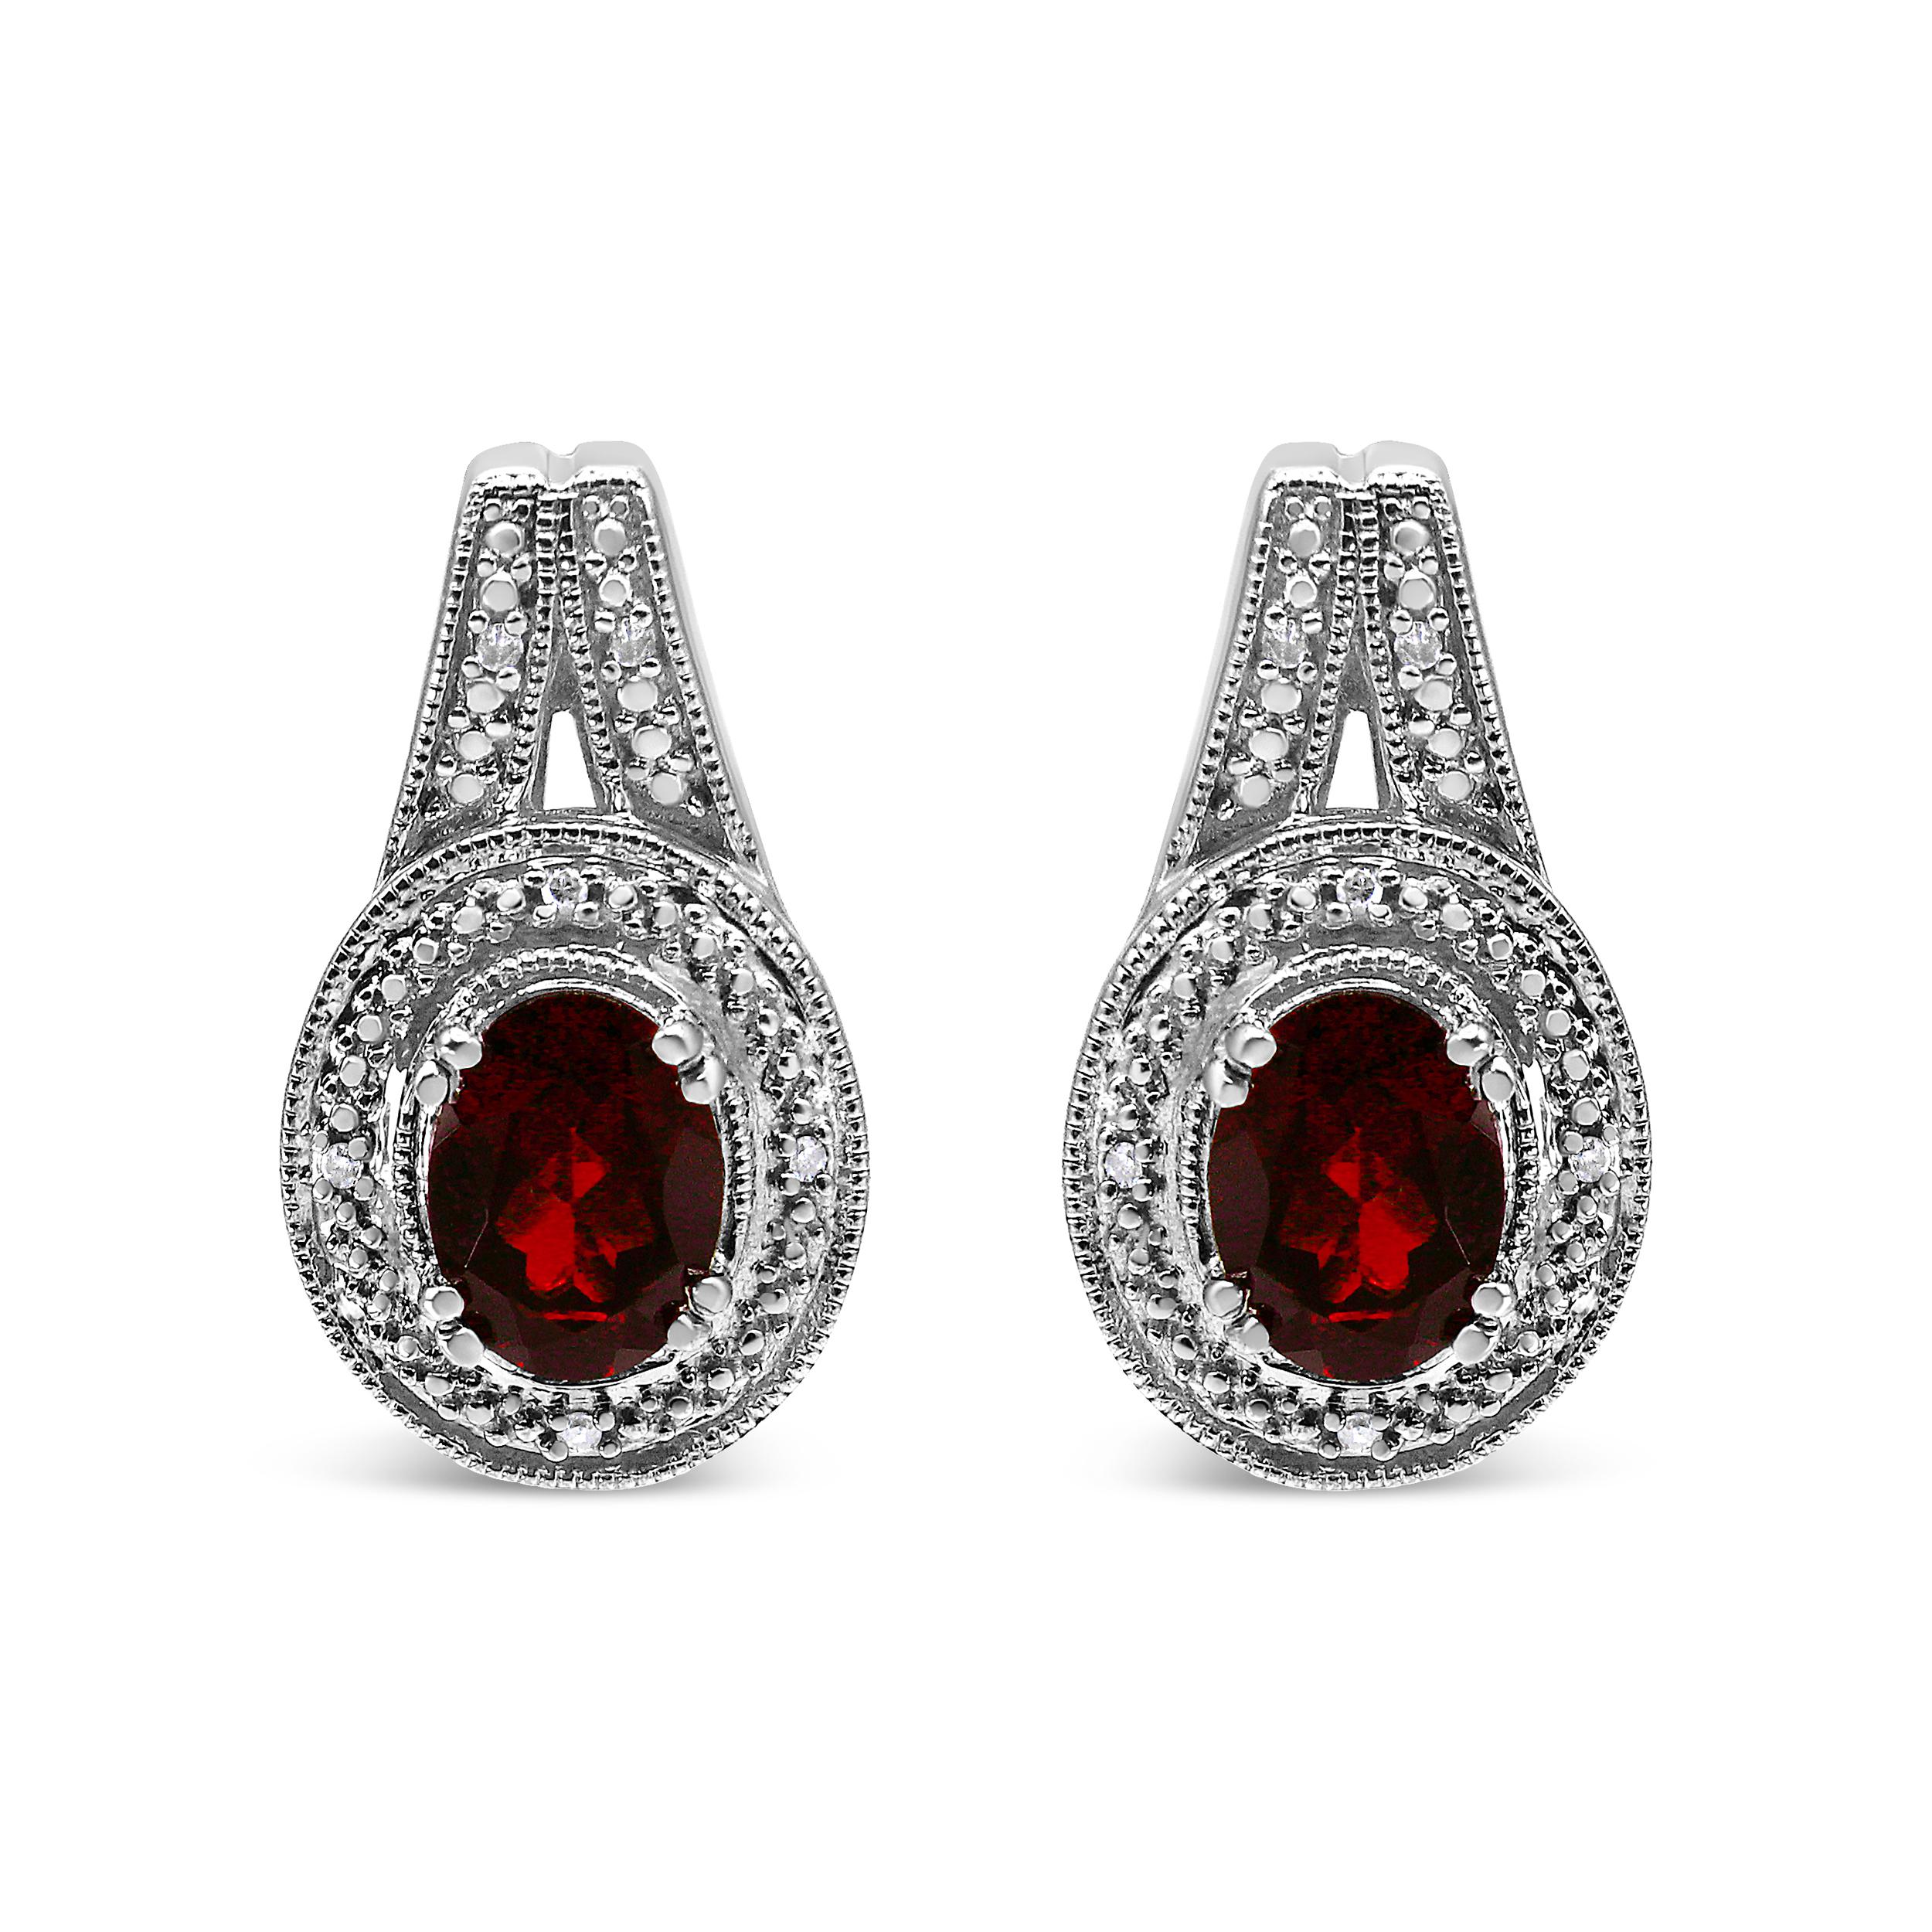 .925 Sterling Silver Diamond Accent and 8x6mm Red Oval Garnet Stud Earrings For Sale